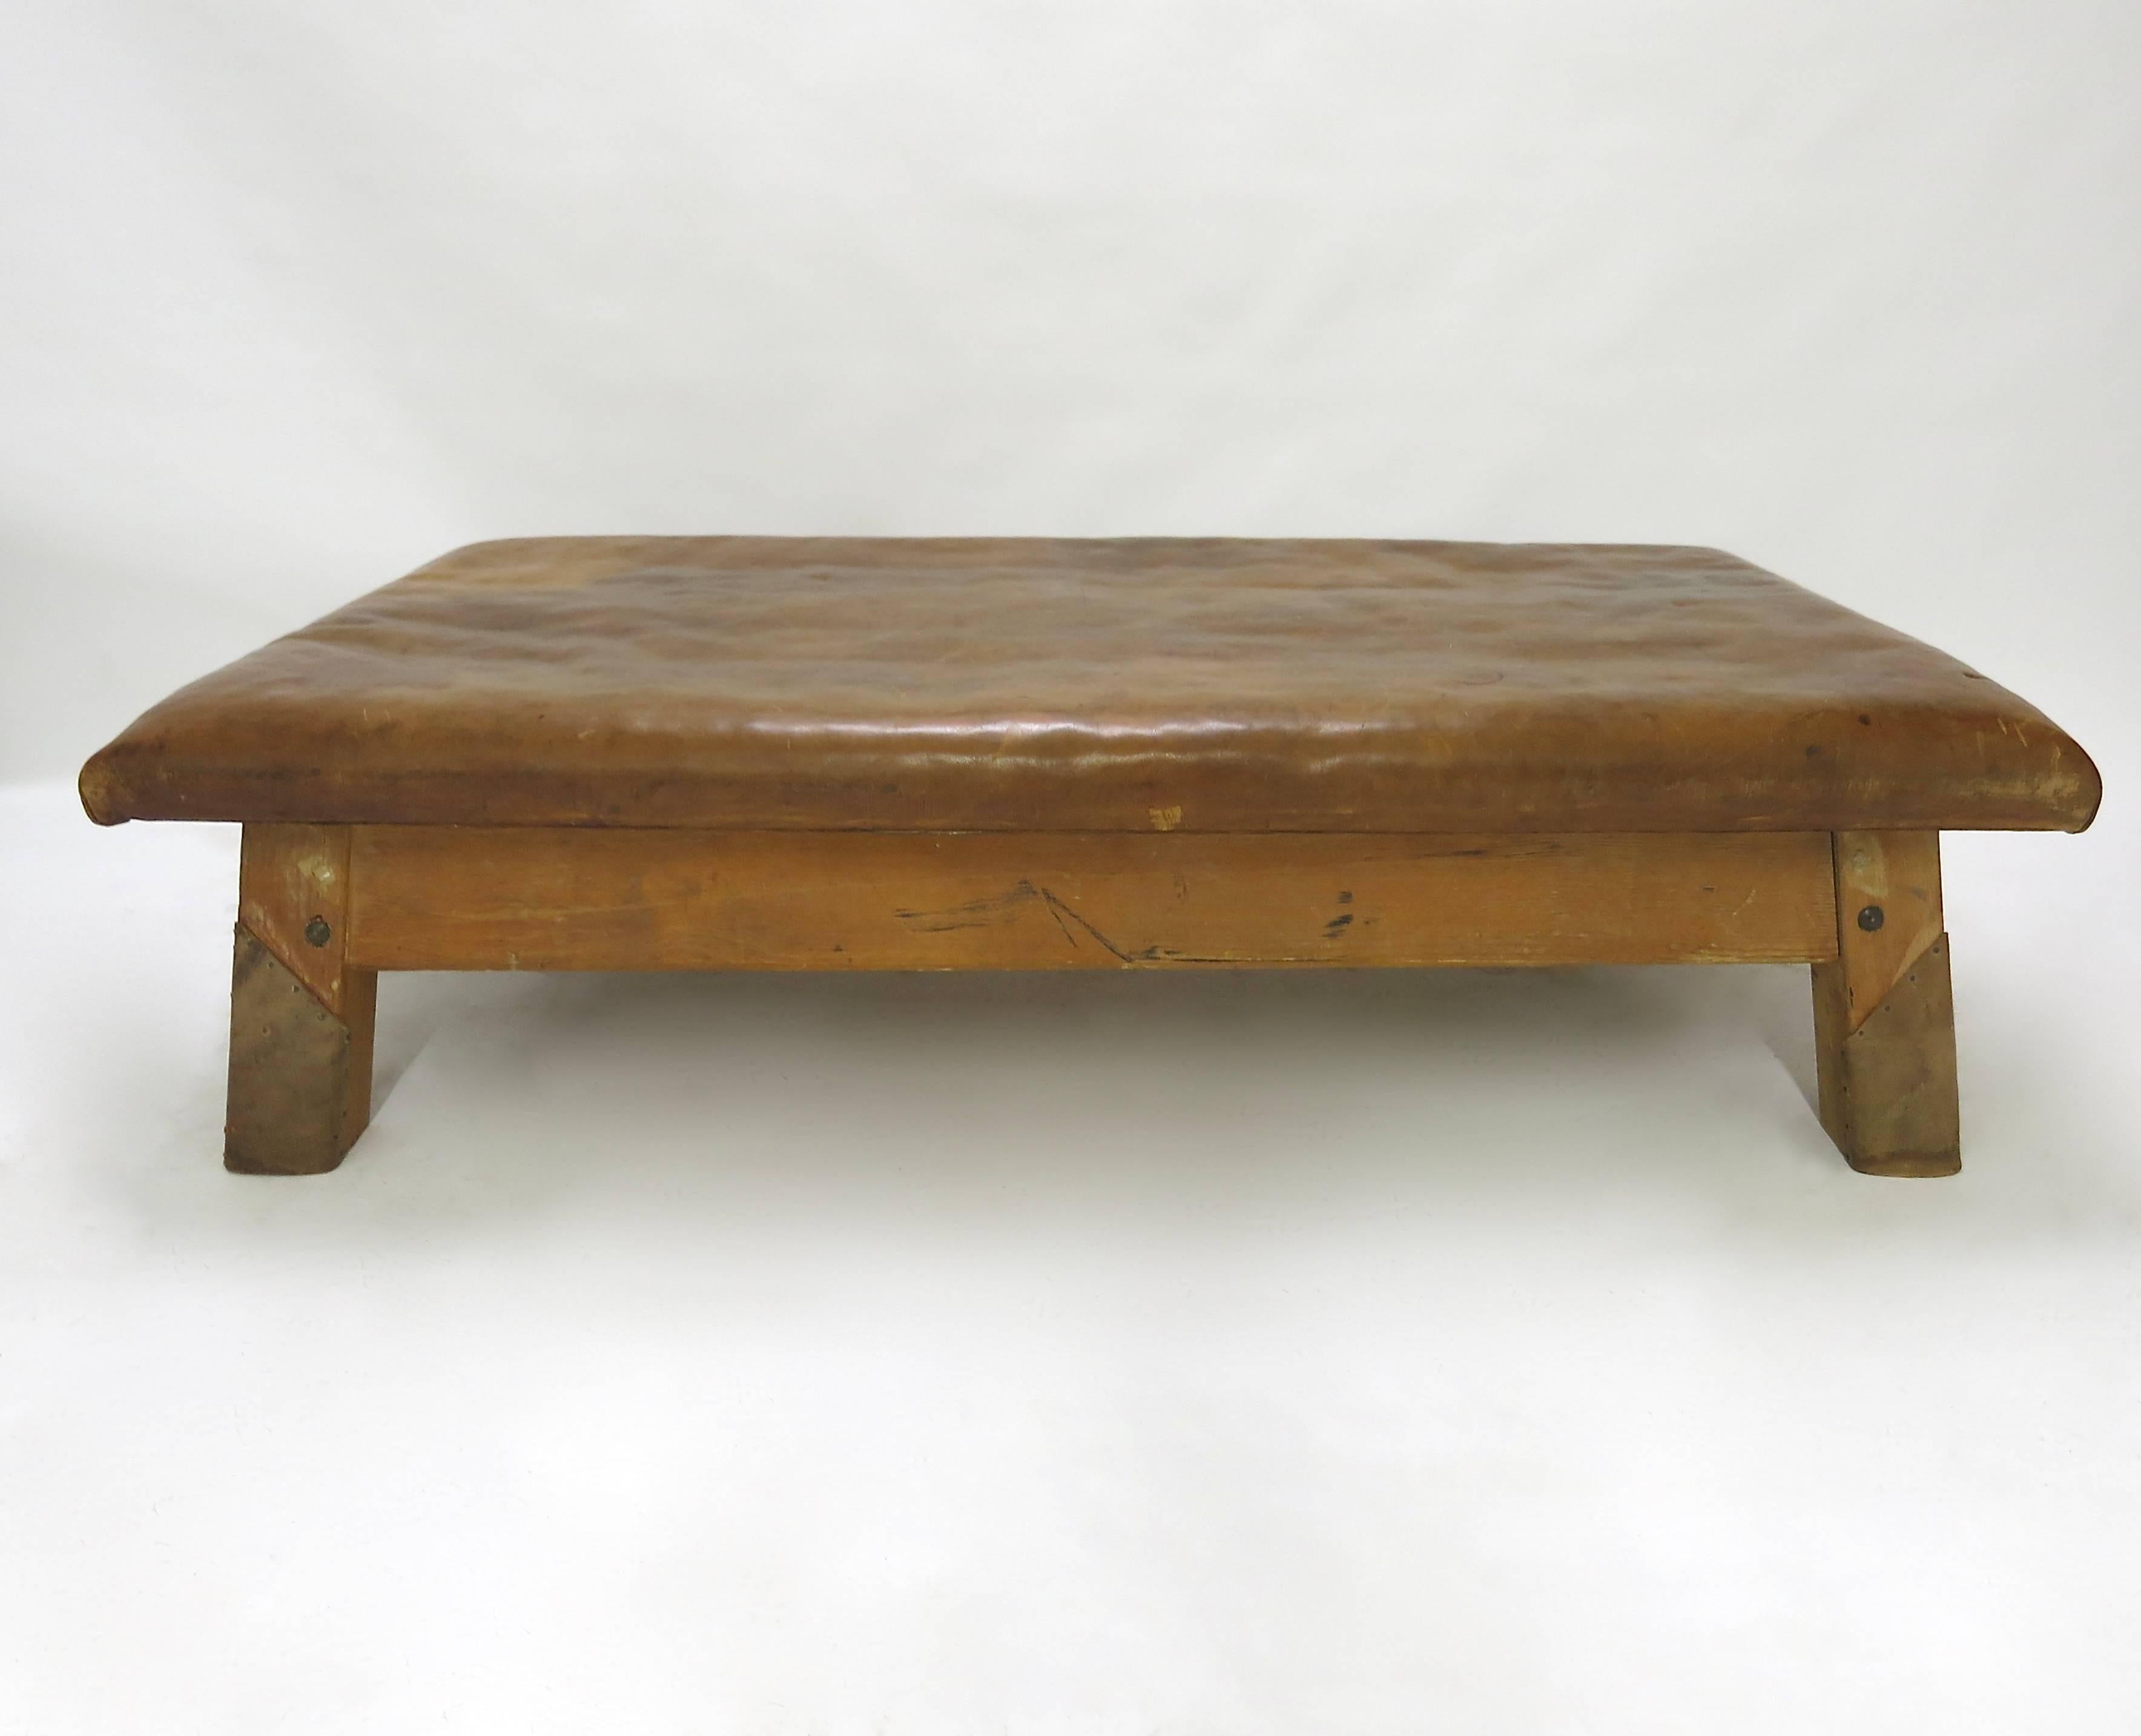 Strong, vintage European gymnasium bench with a removable leather covered top that sits in to the bench's solid wooden frame. The gym bench frame maintains its original markings where the straps and rings were once held. Each of the four legs has a